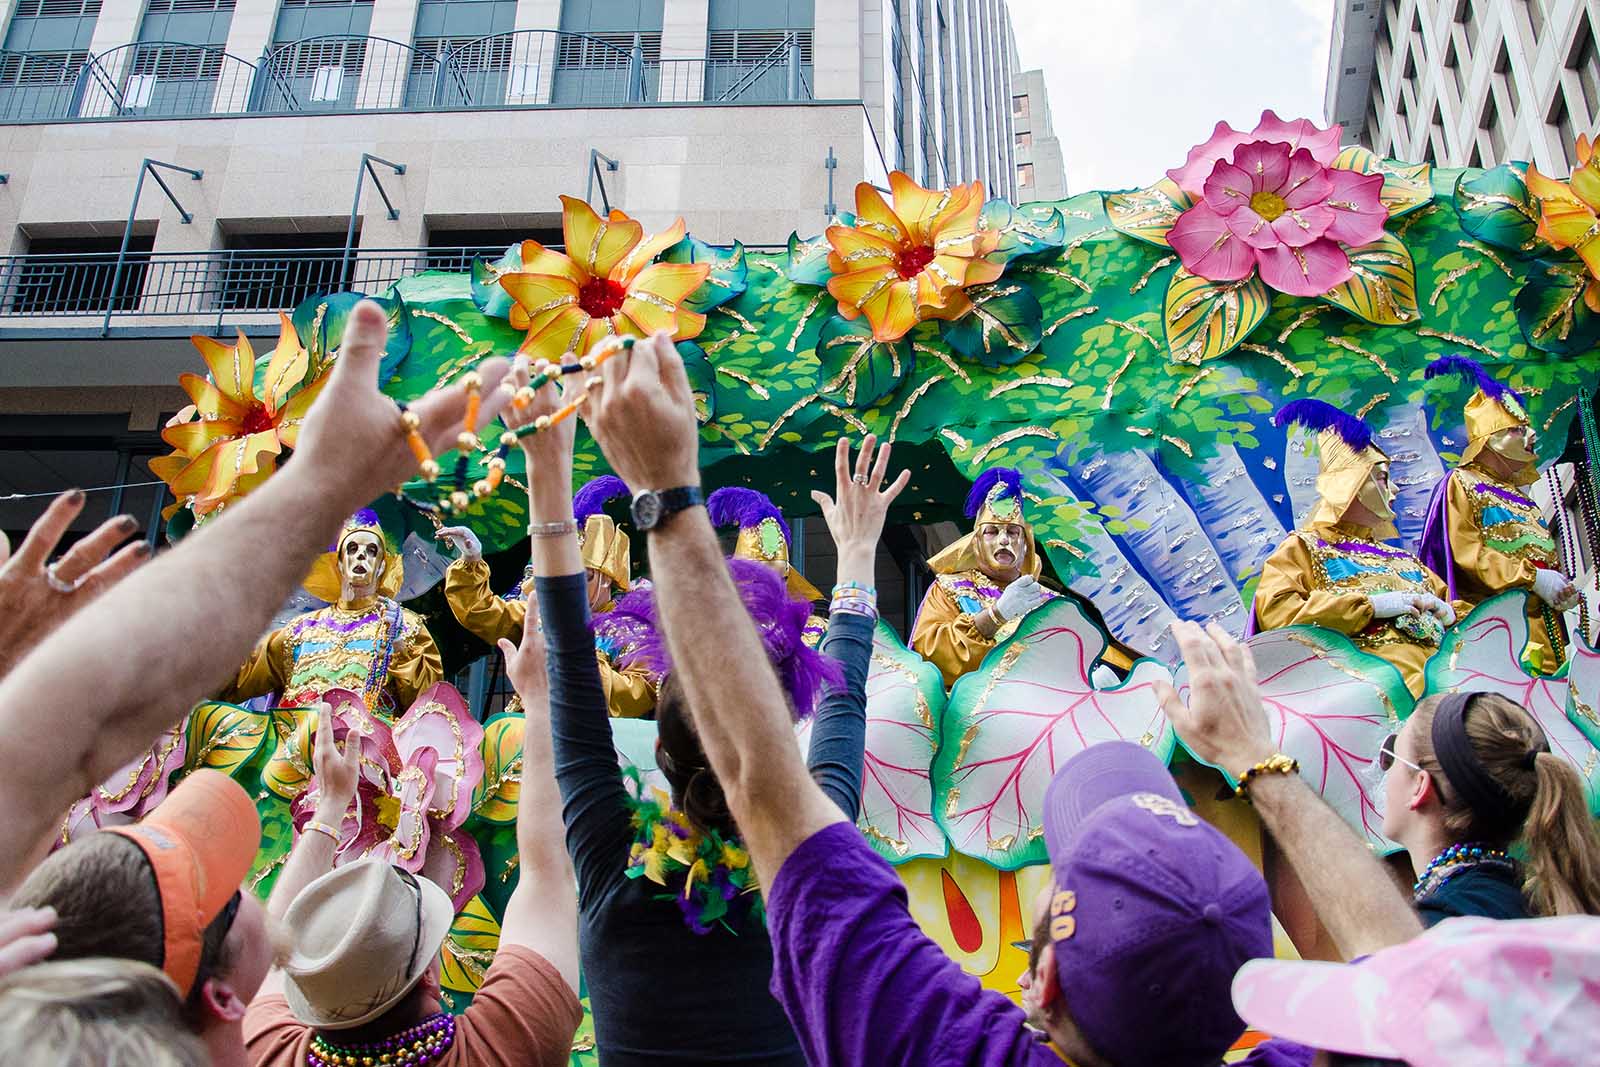 Mardi Gras float with bright colored flowers and visitors reaching out near our Garden District hotel